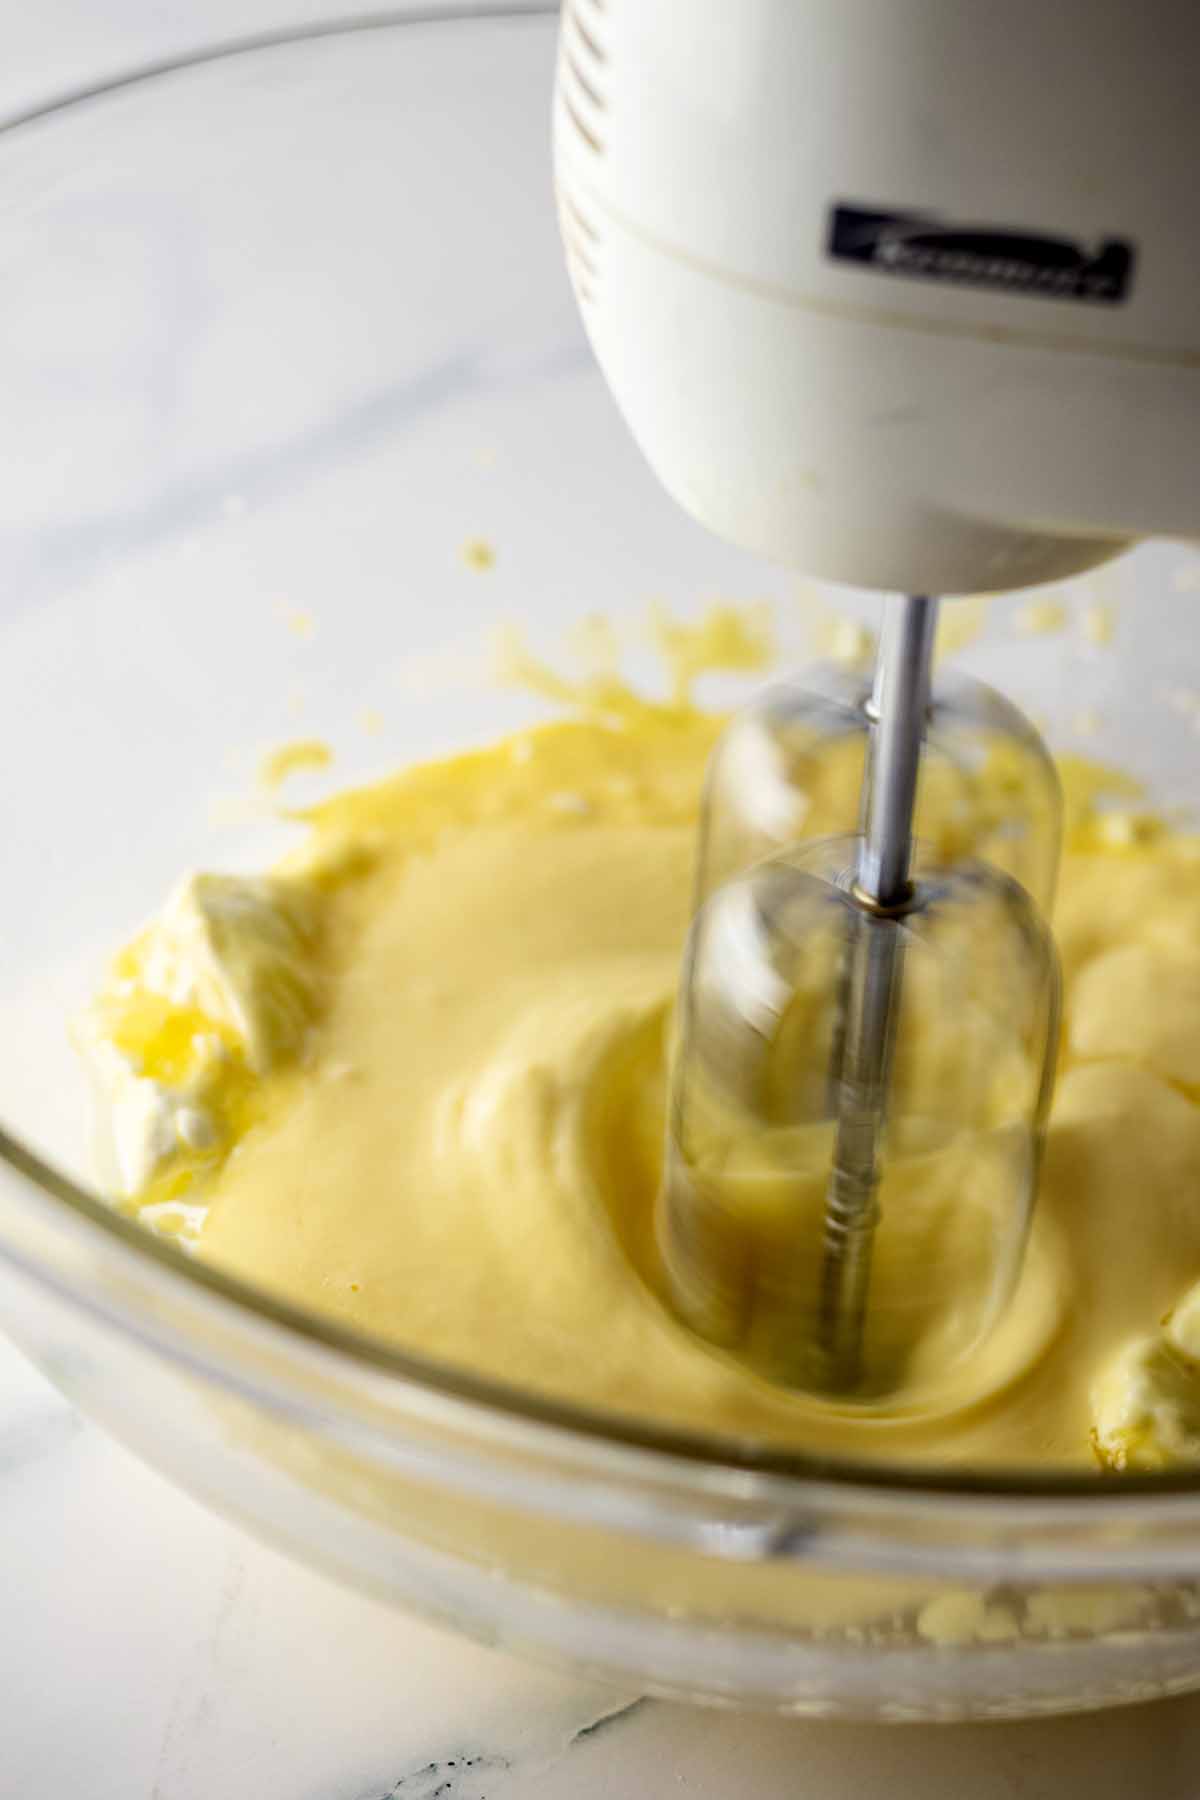 Wet ingredients being beaten with an electric mixer